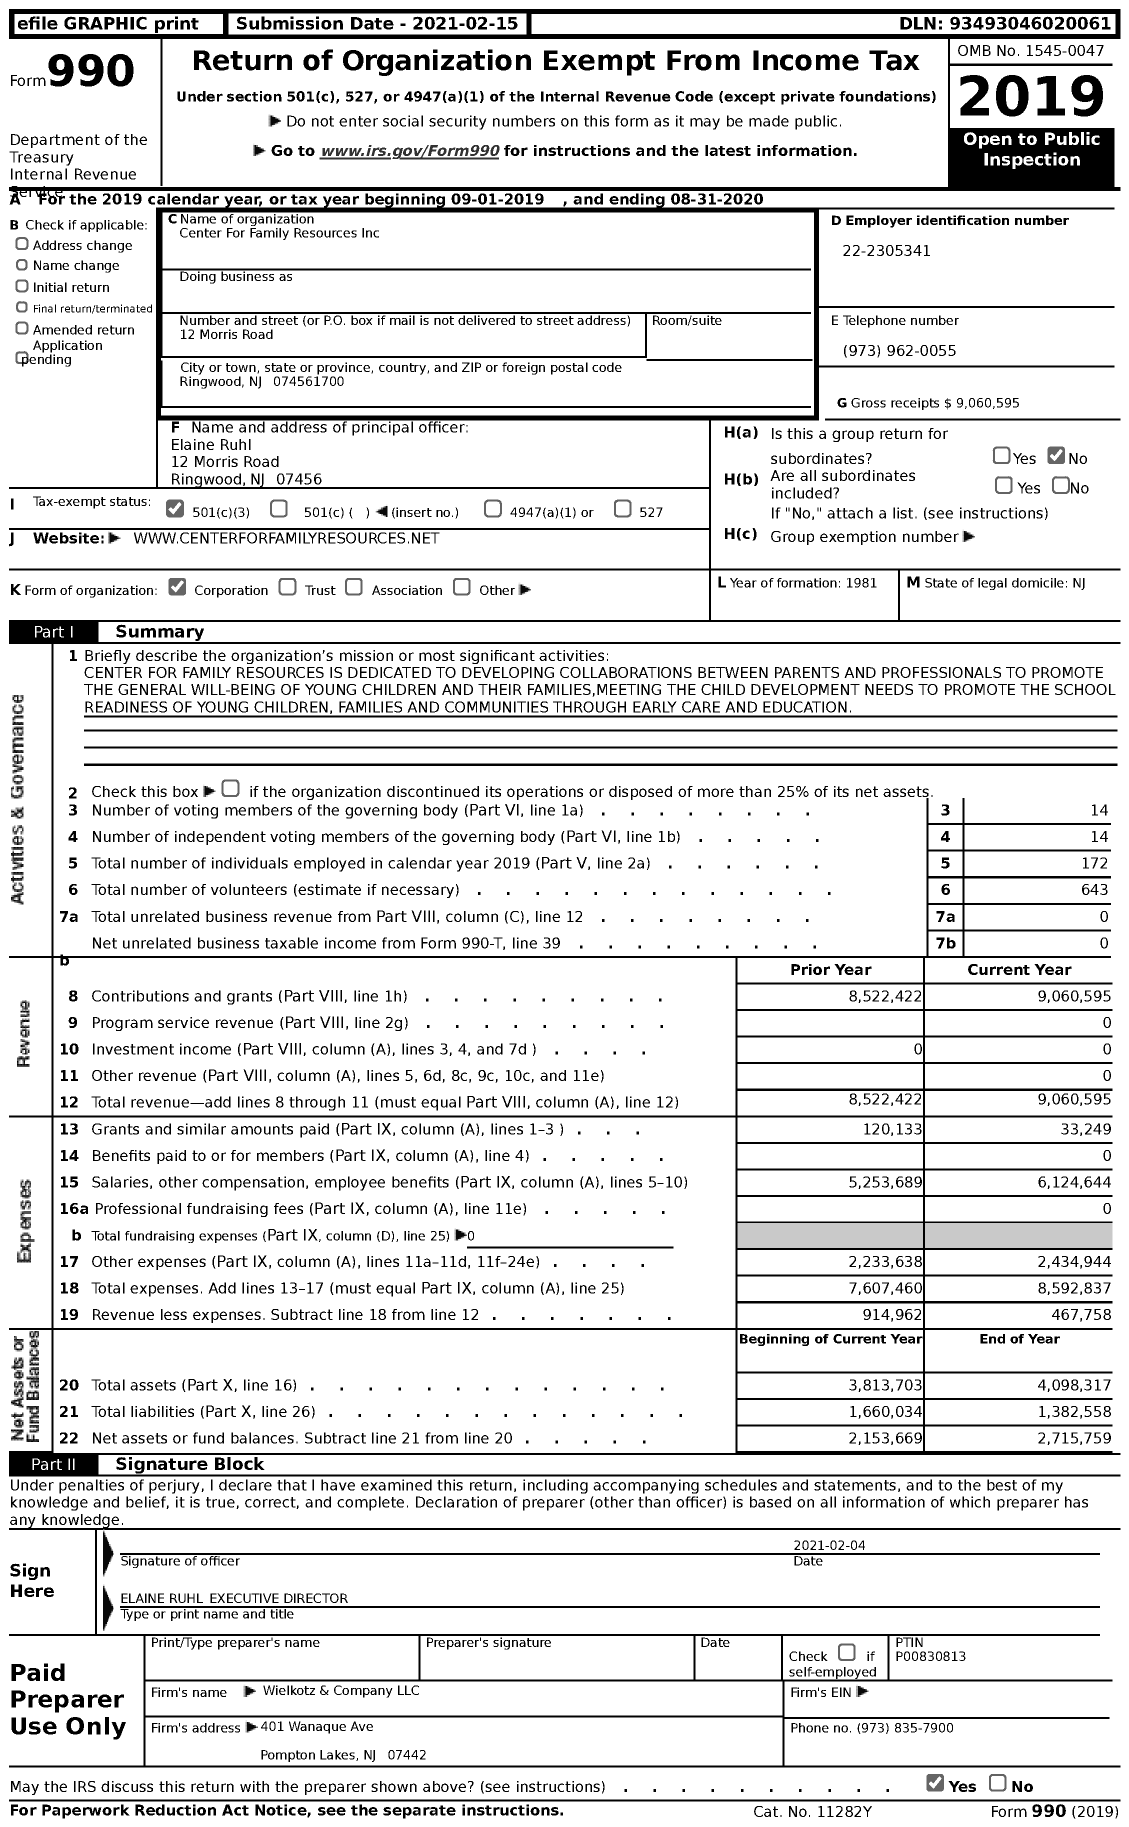 Image of first page of 2019 Form 990 for Center for Family Resources (CFR)